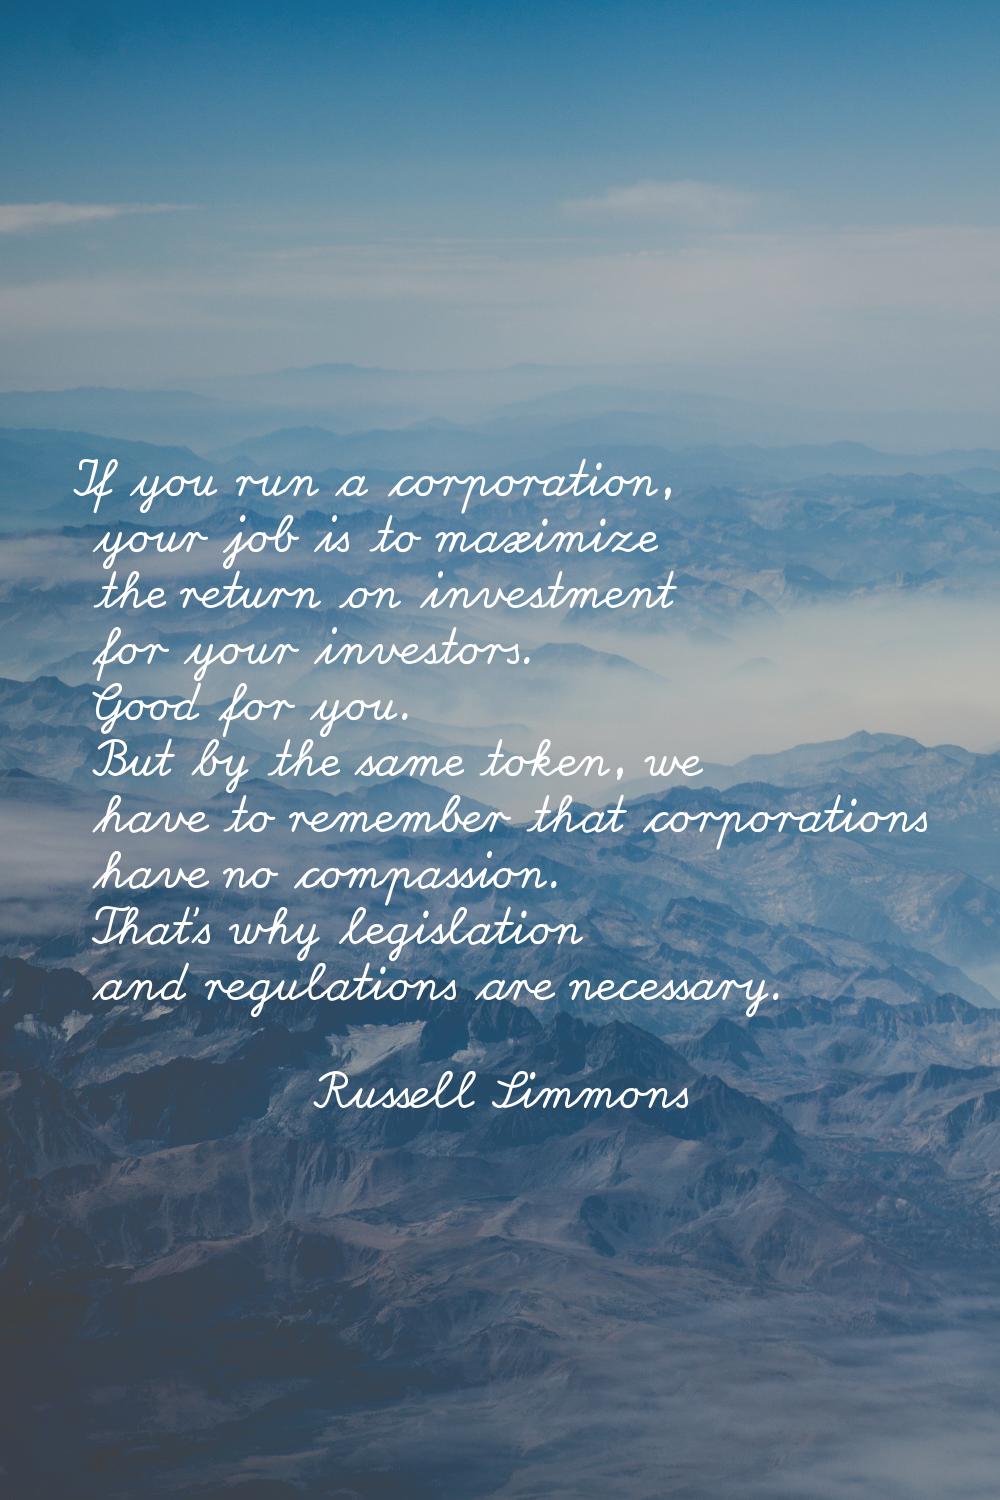 If you run a corporation, your job is to maximize the return on investment for your investors. Good